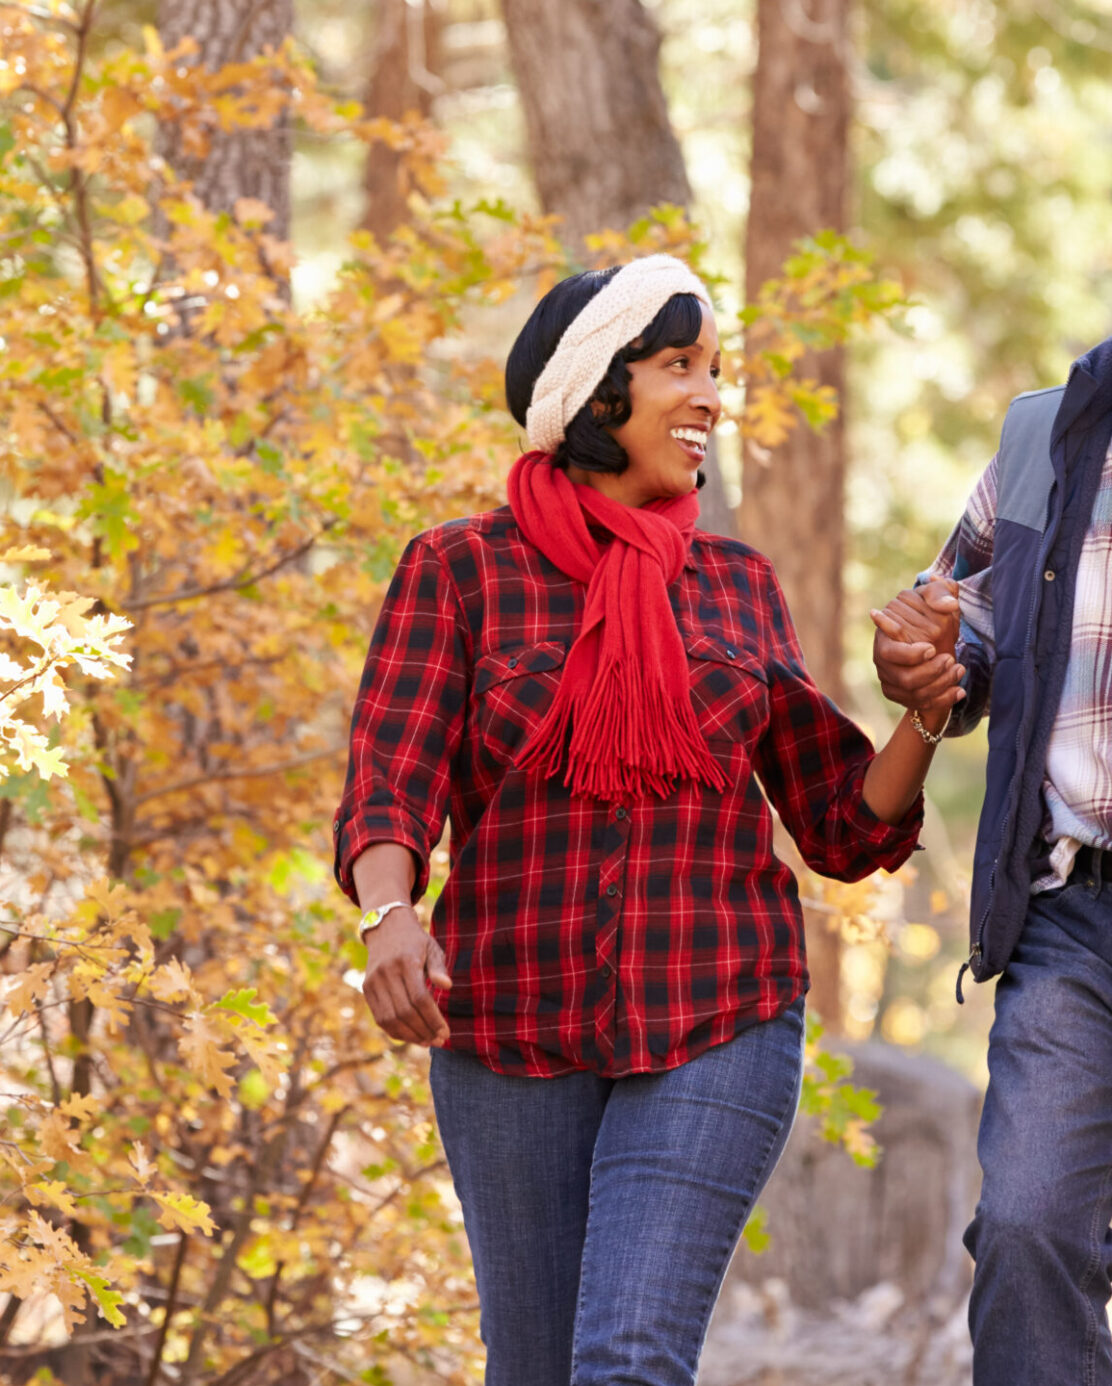 A Black couple holds hands while walking through fall foliage